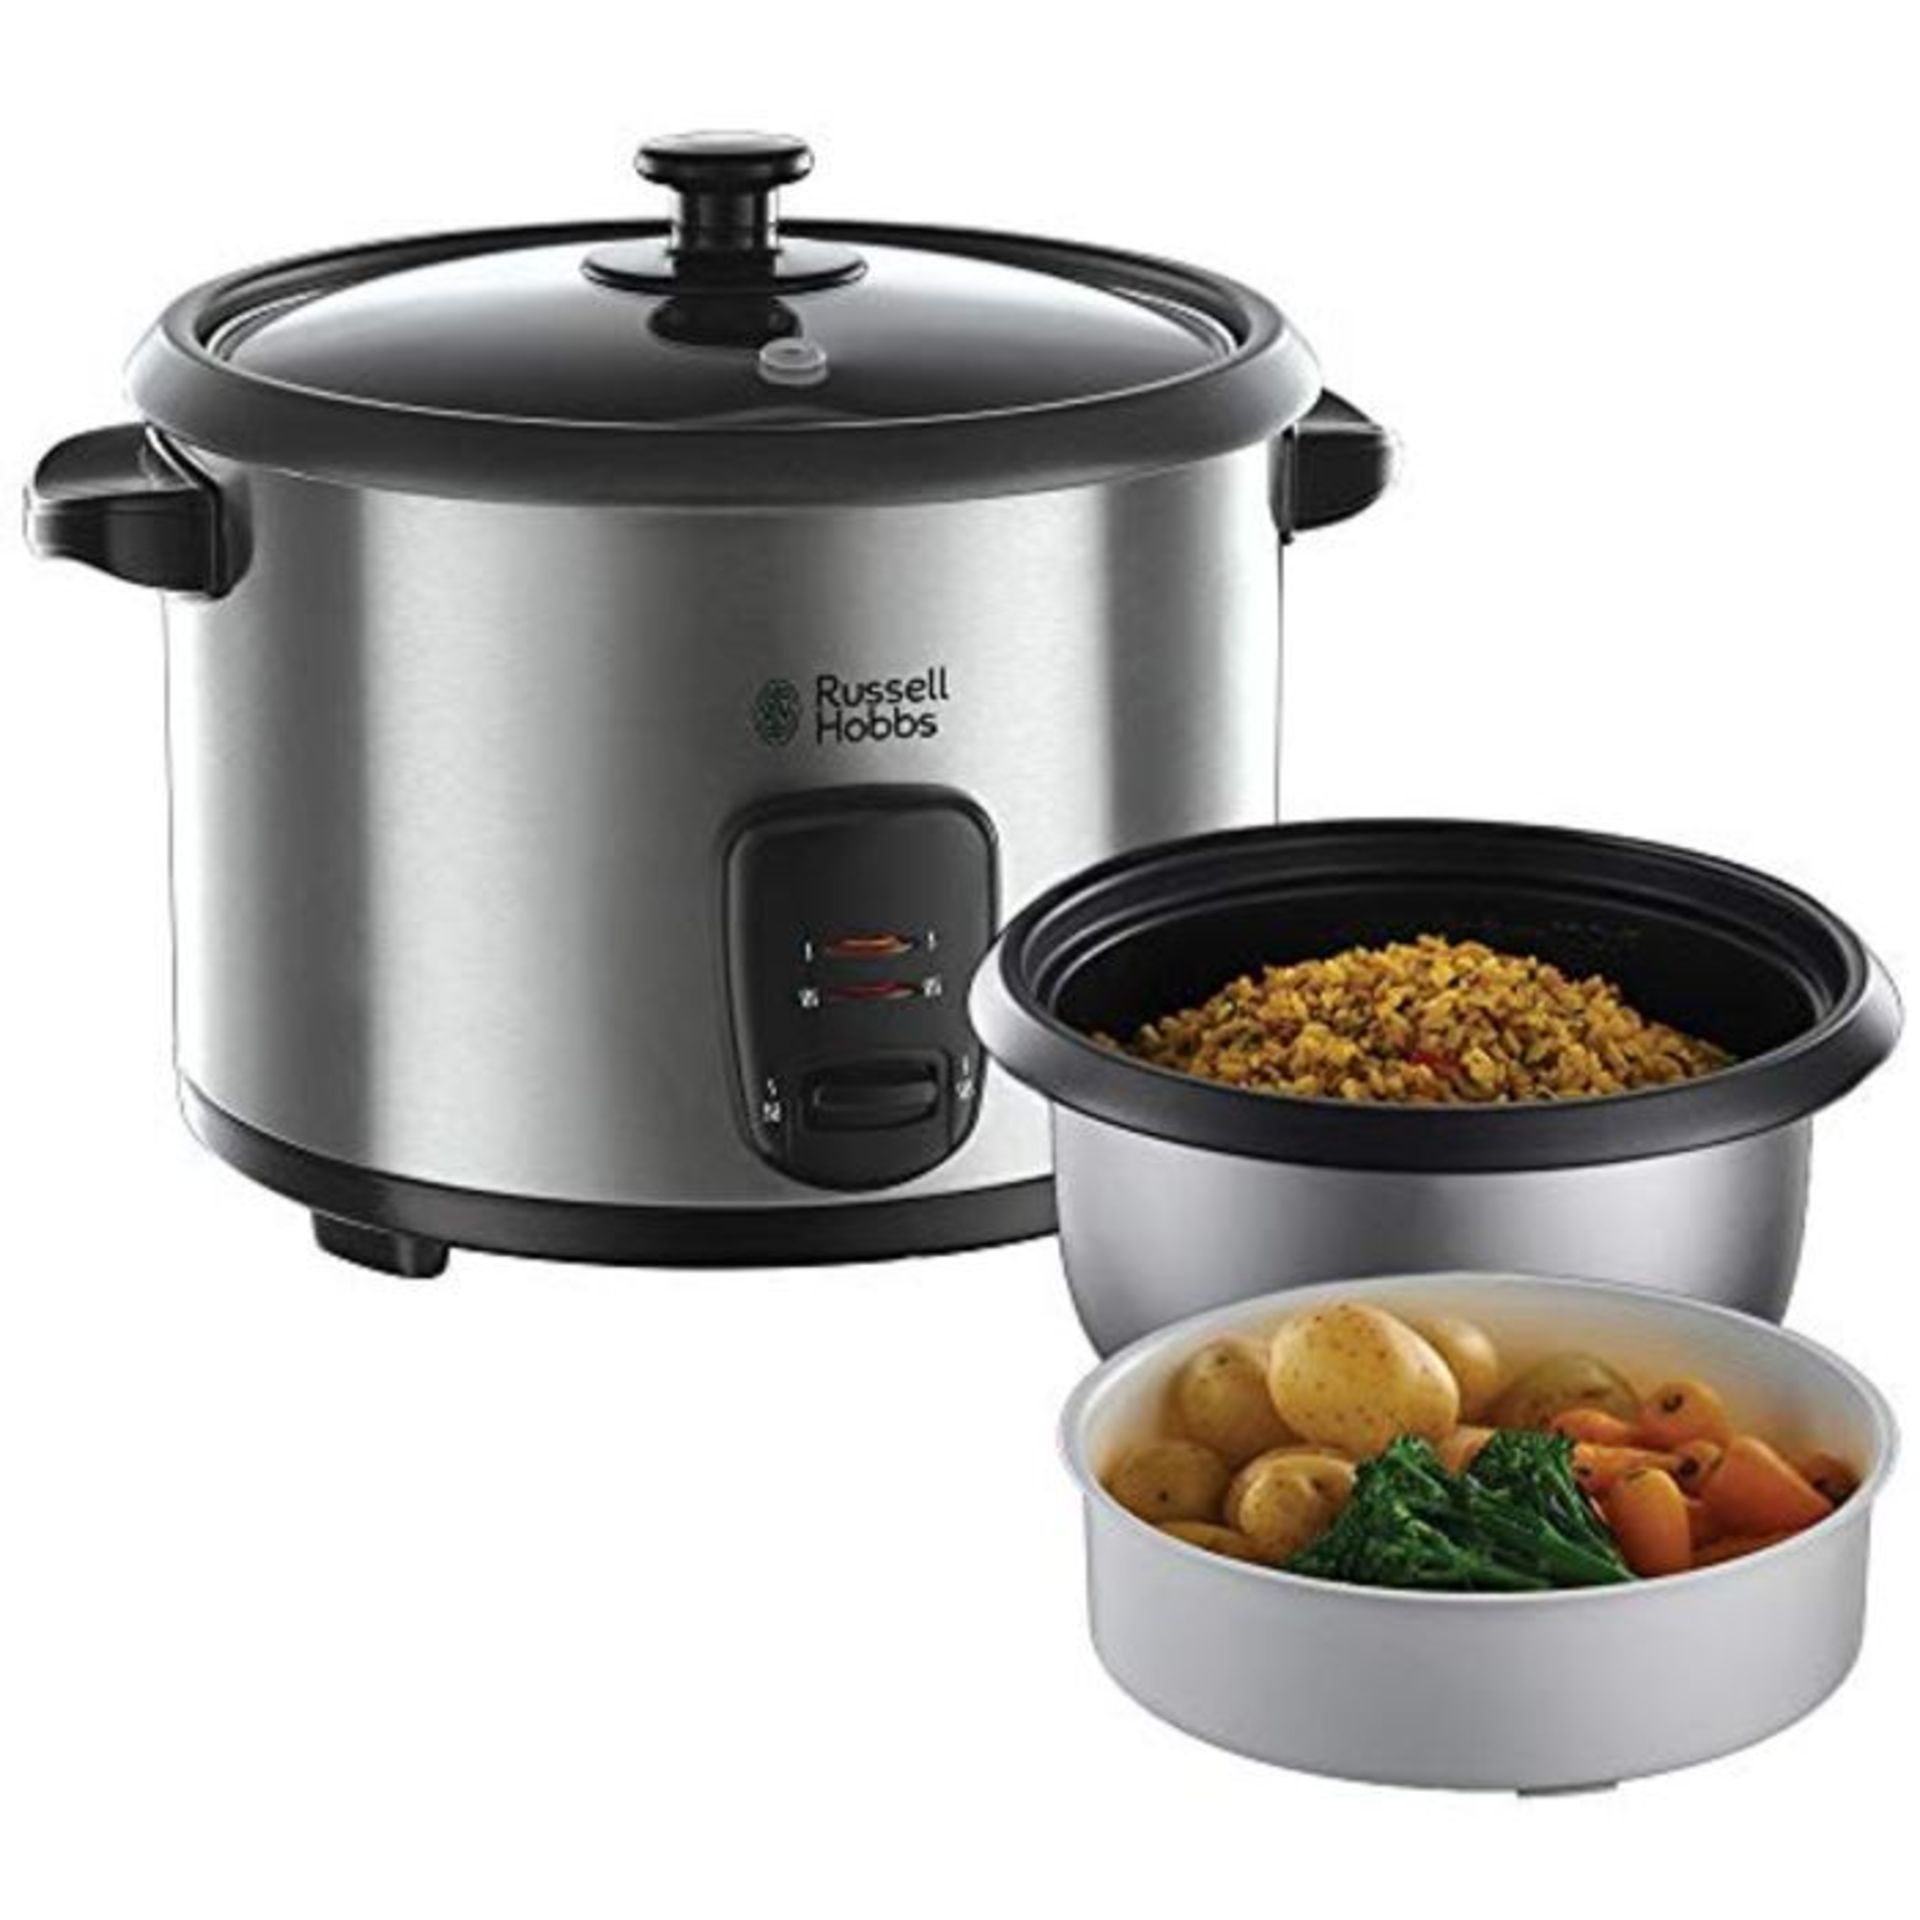 Russell Hobbs Cook @ Home 19750-56 rice cooker with 700 W and 1.8 litre capacity made